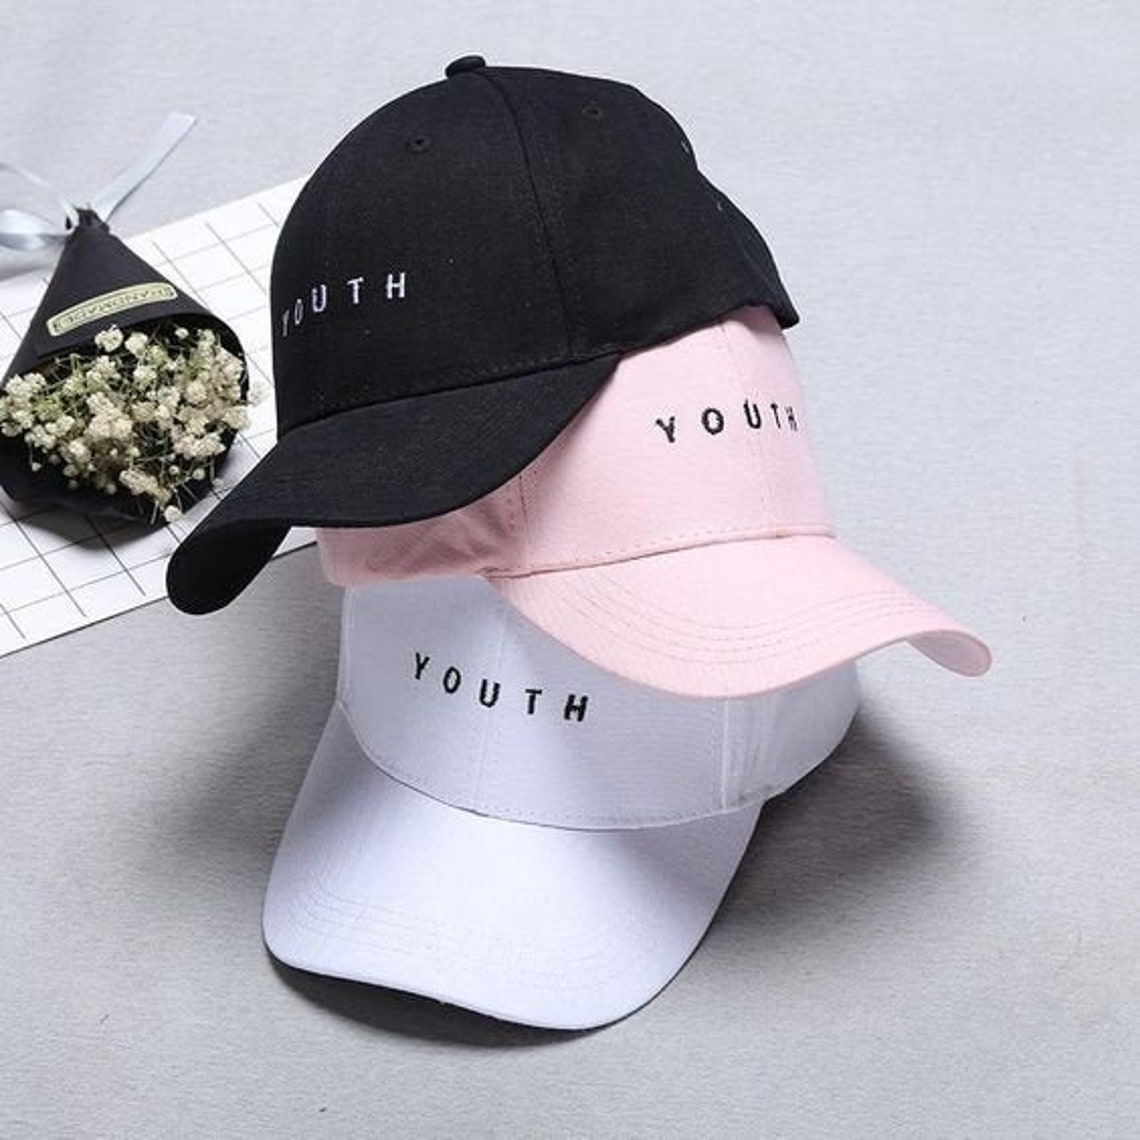 YOUTH. Design Embrodiered Baseball Cap | Etsy